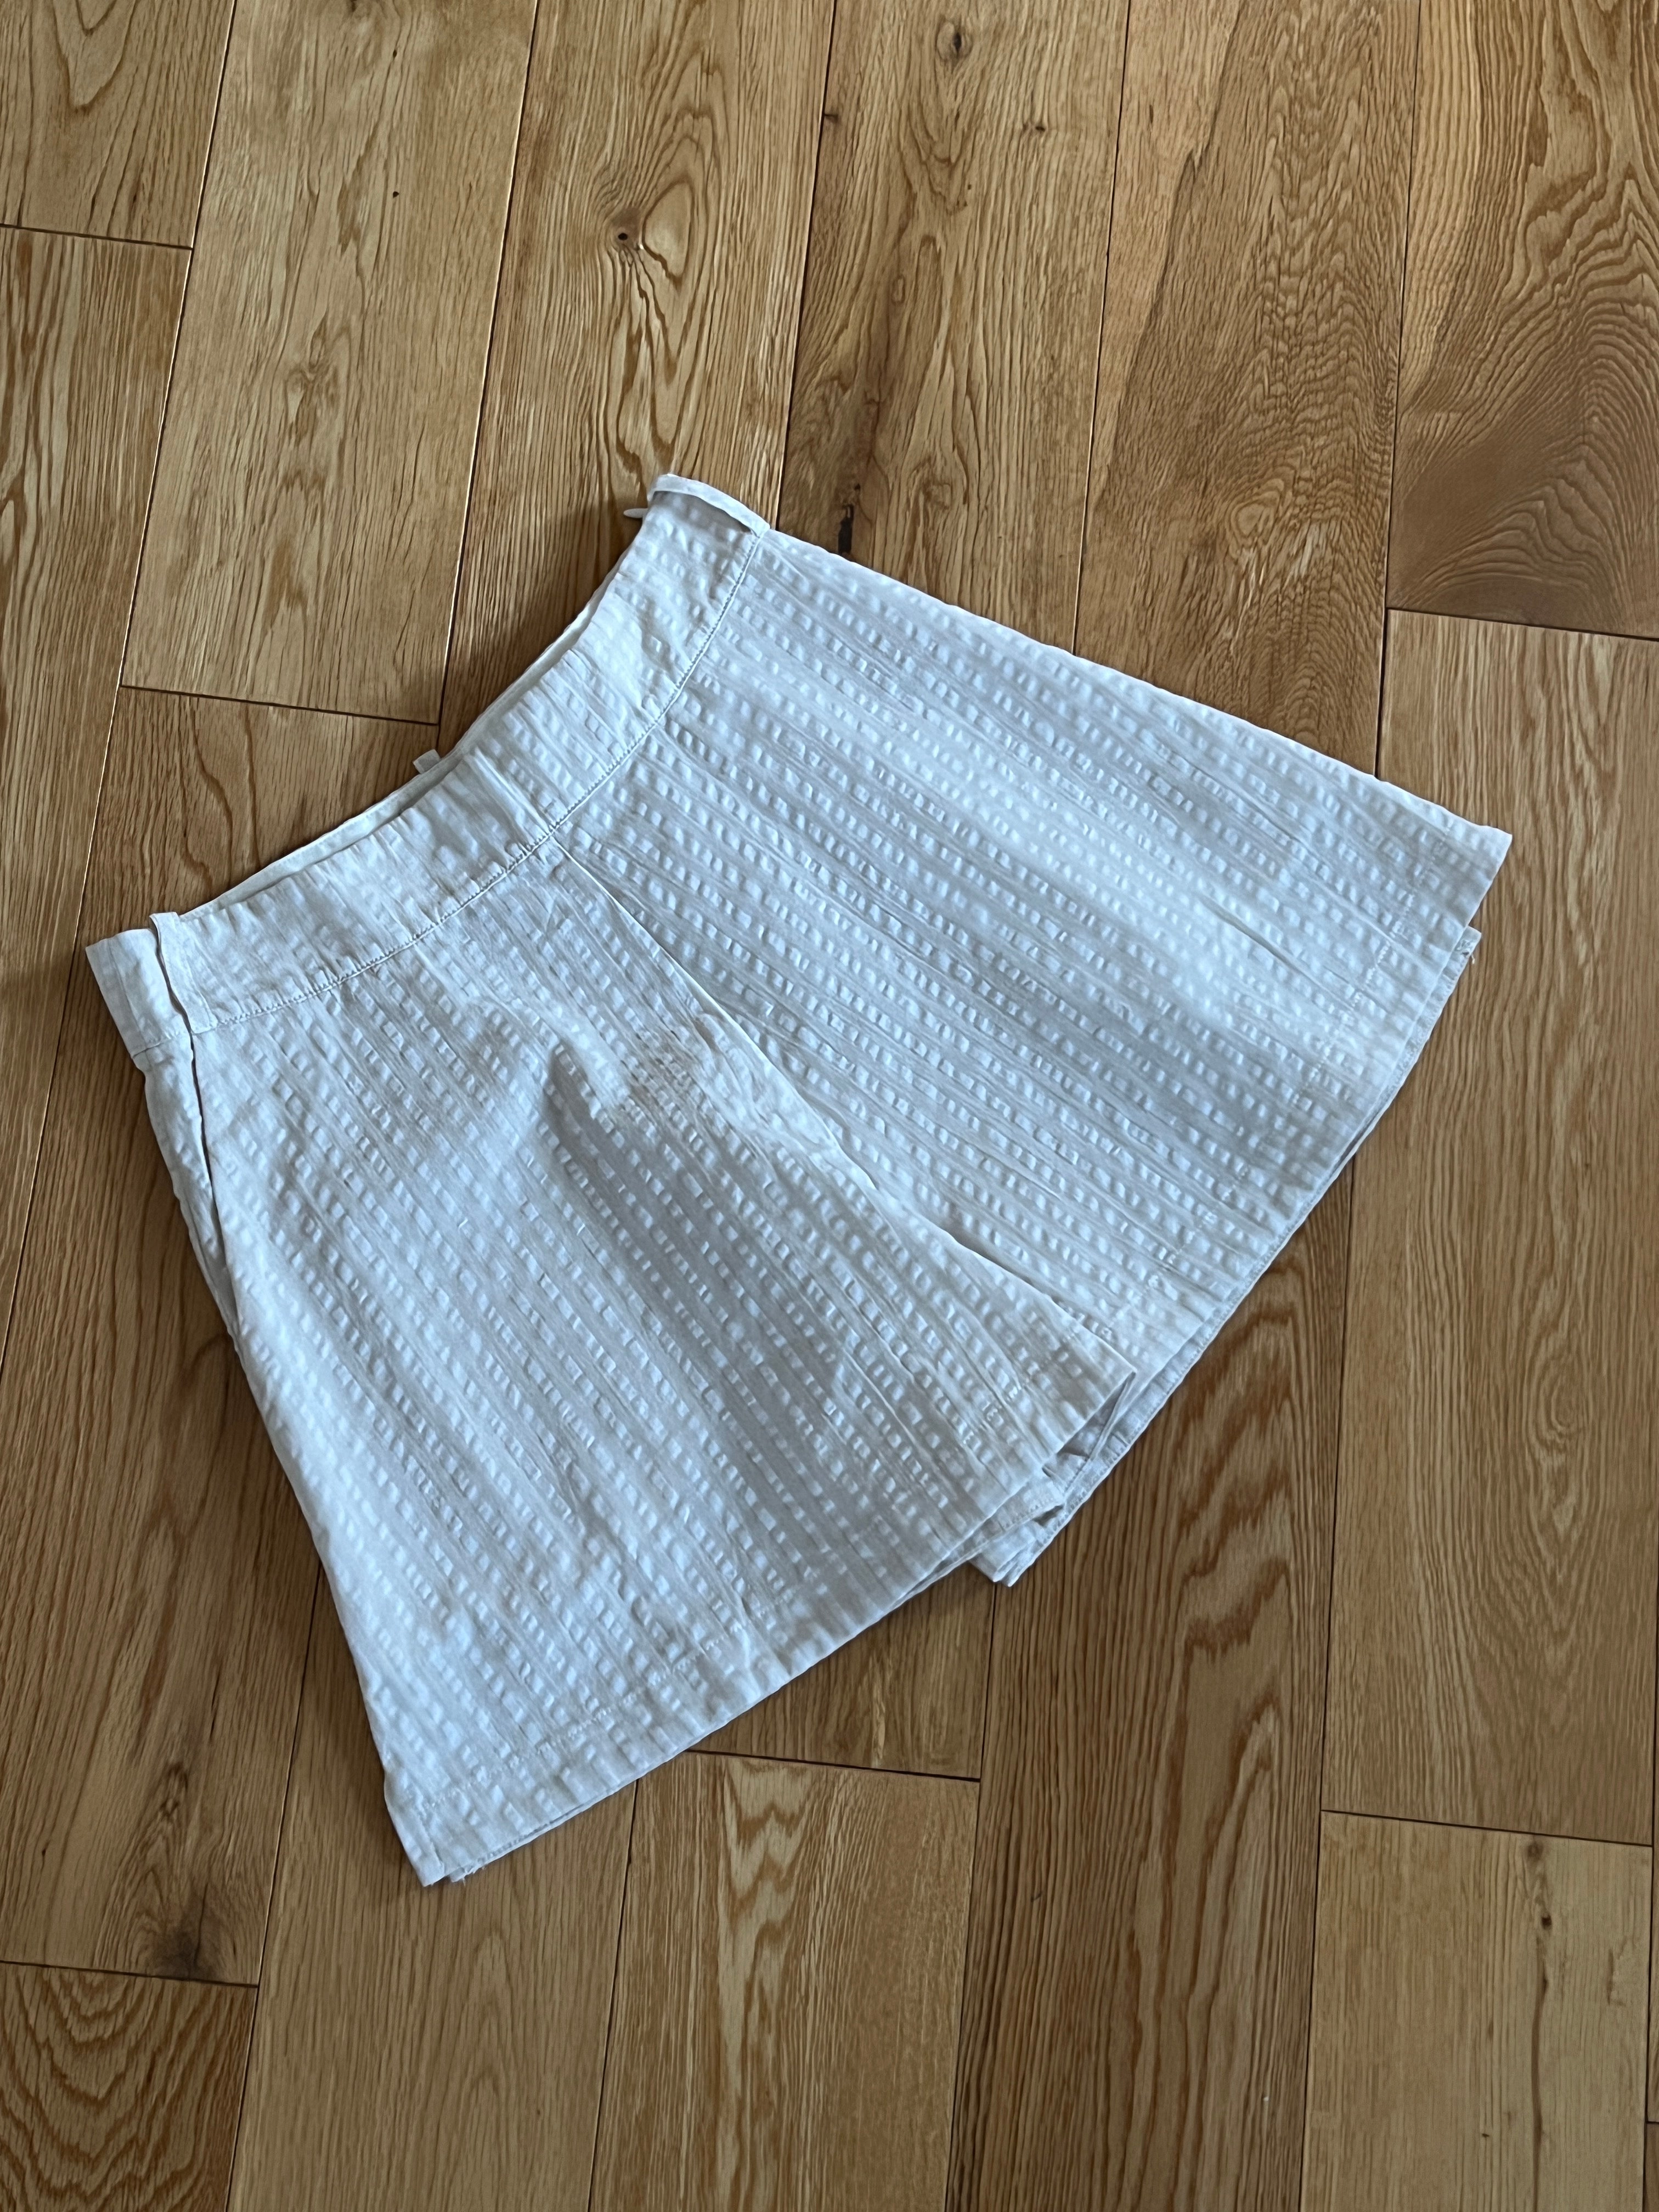 THE MARTINE SHORTS - size S